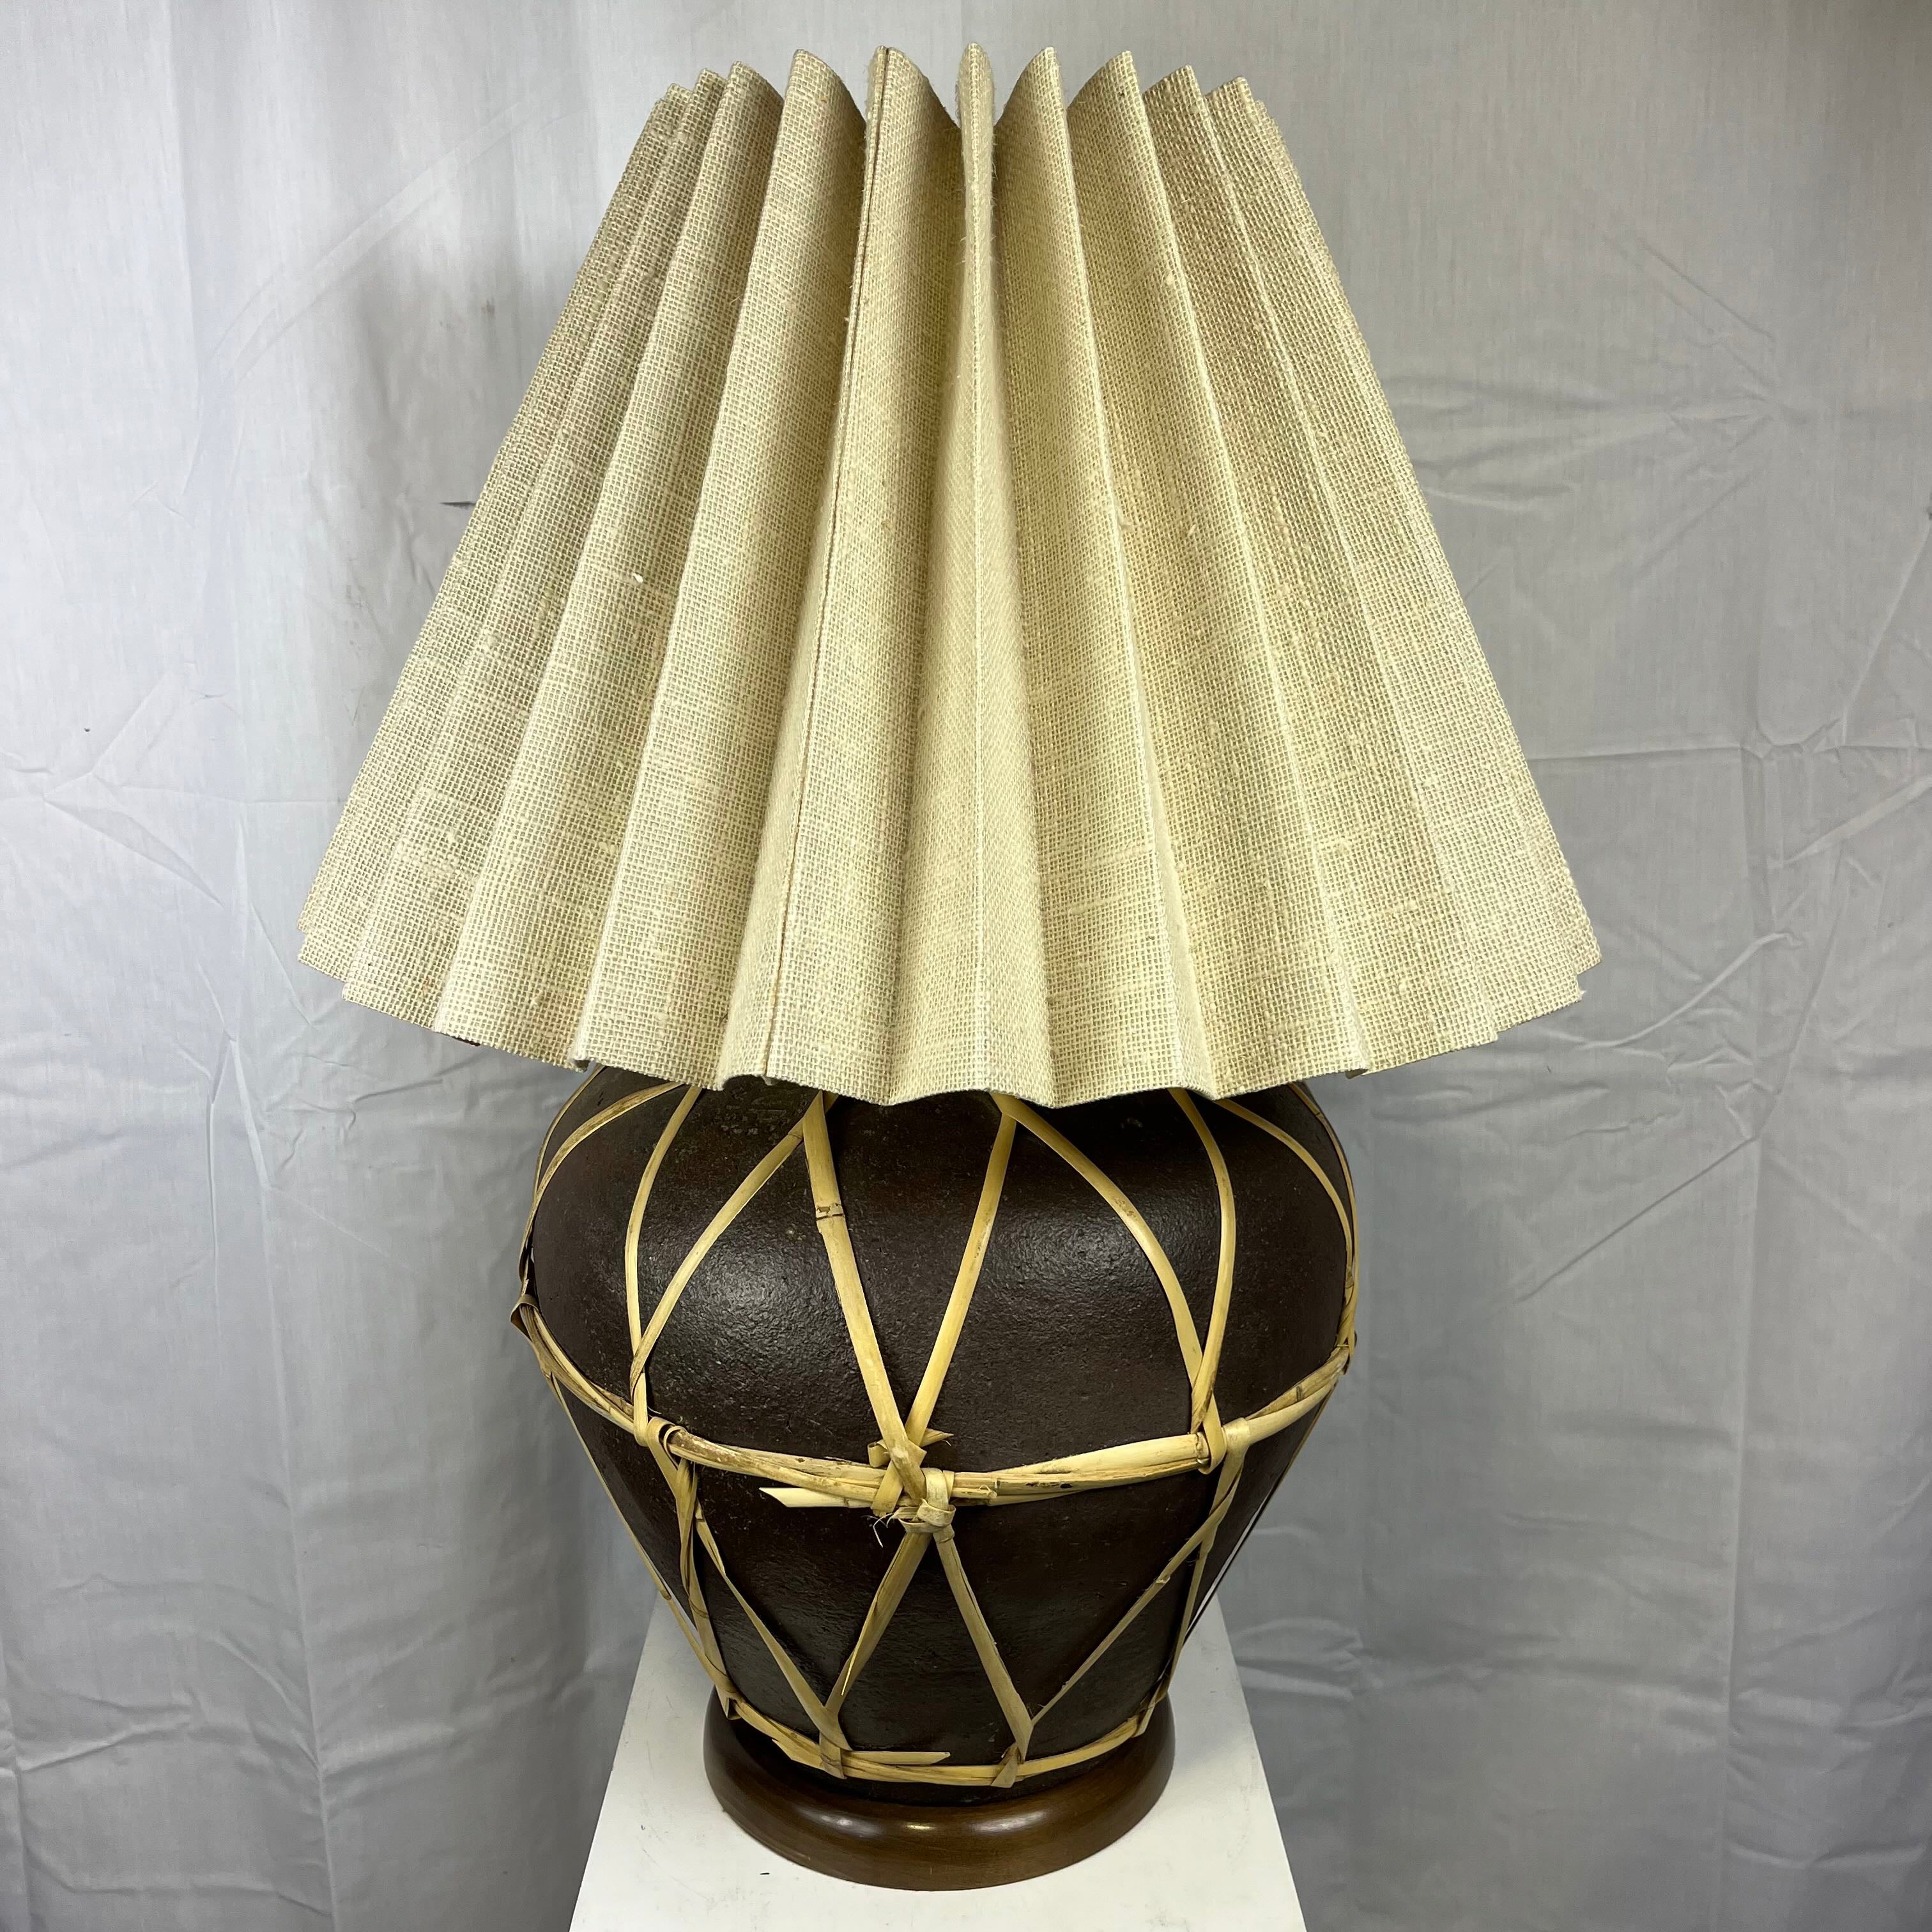 22" Diameter x 29.5" Ceramic with Criss Cross Dried Grass Design on Wood Base 2 Light Table Lamp